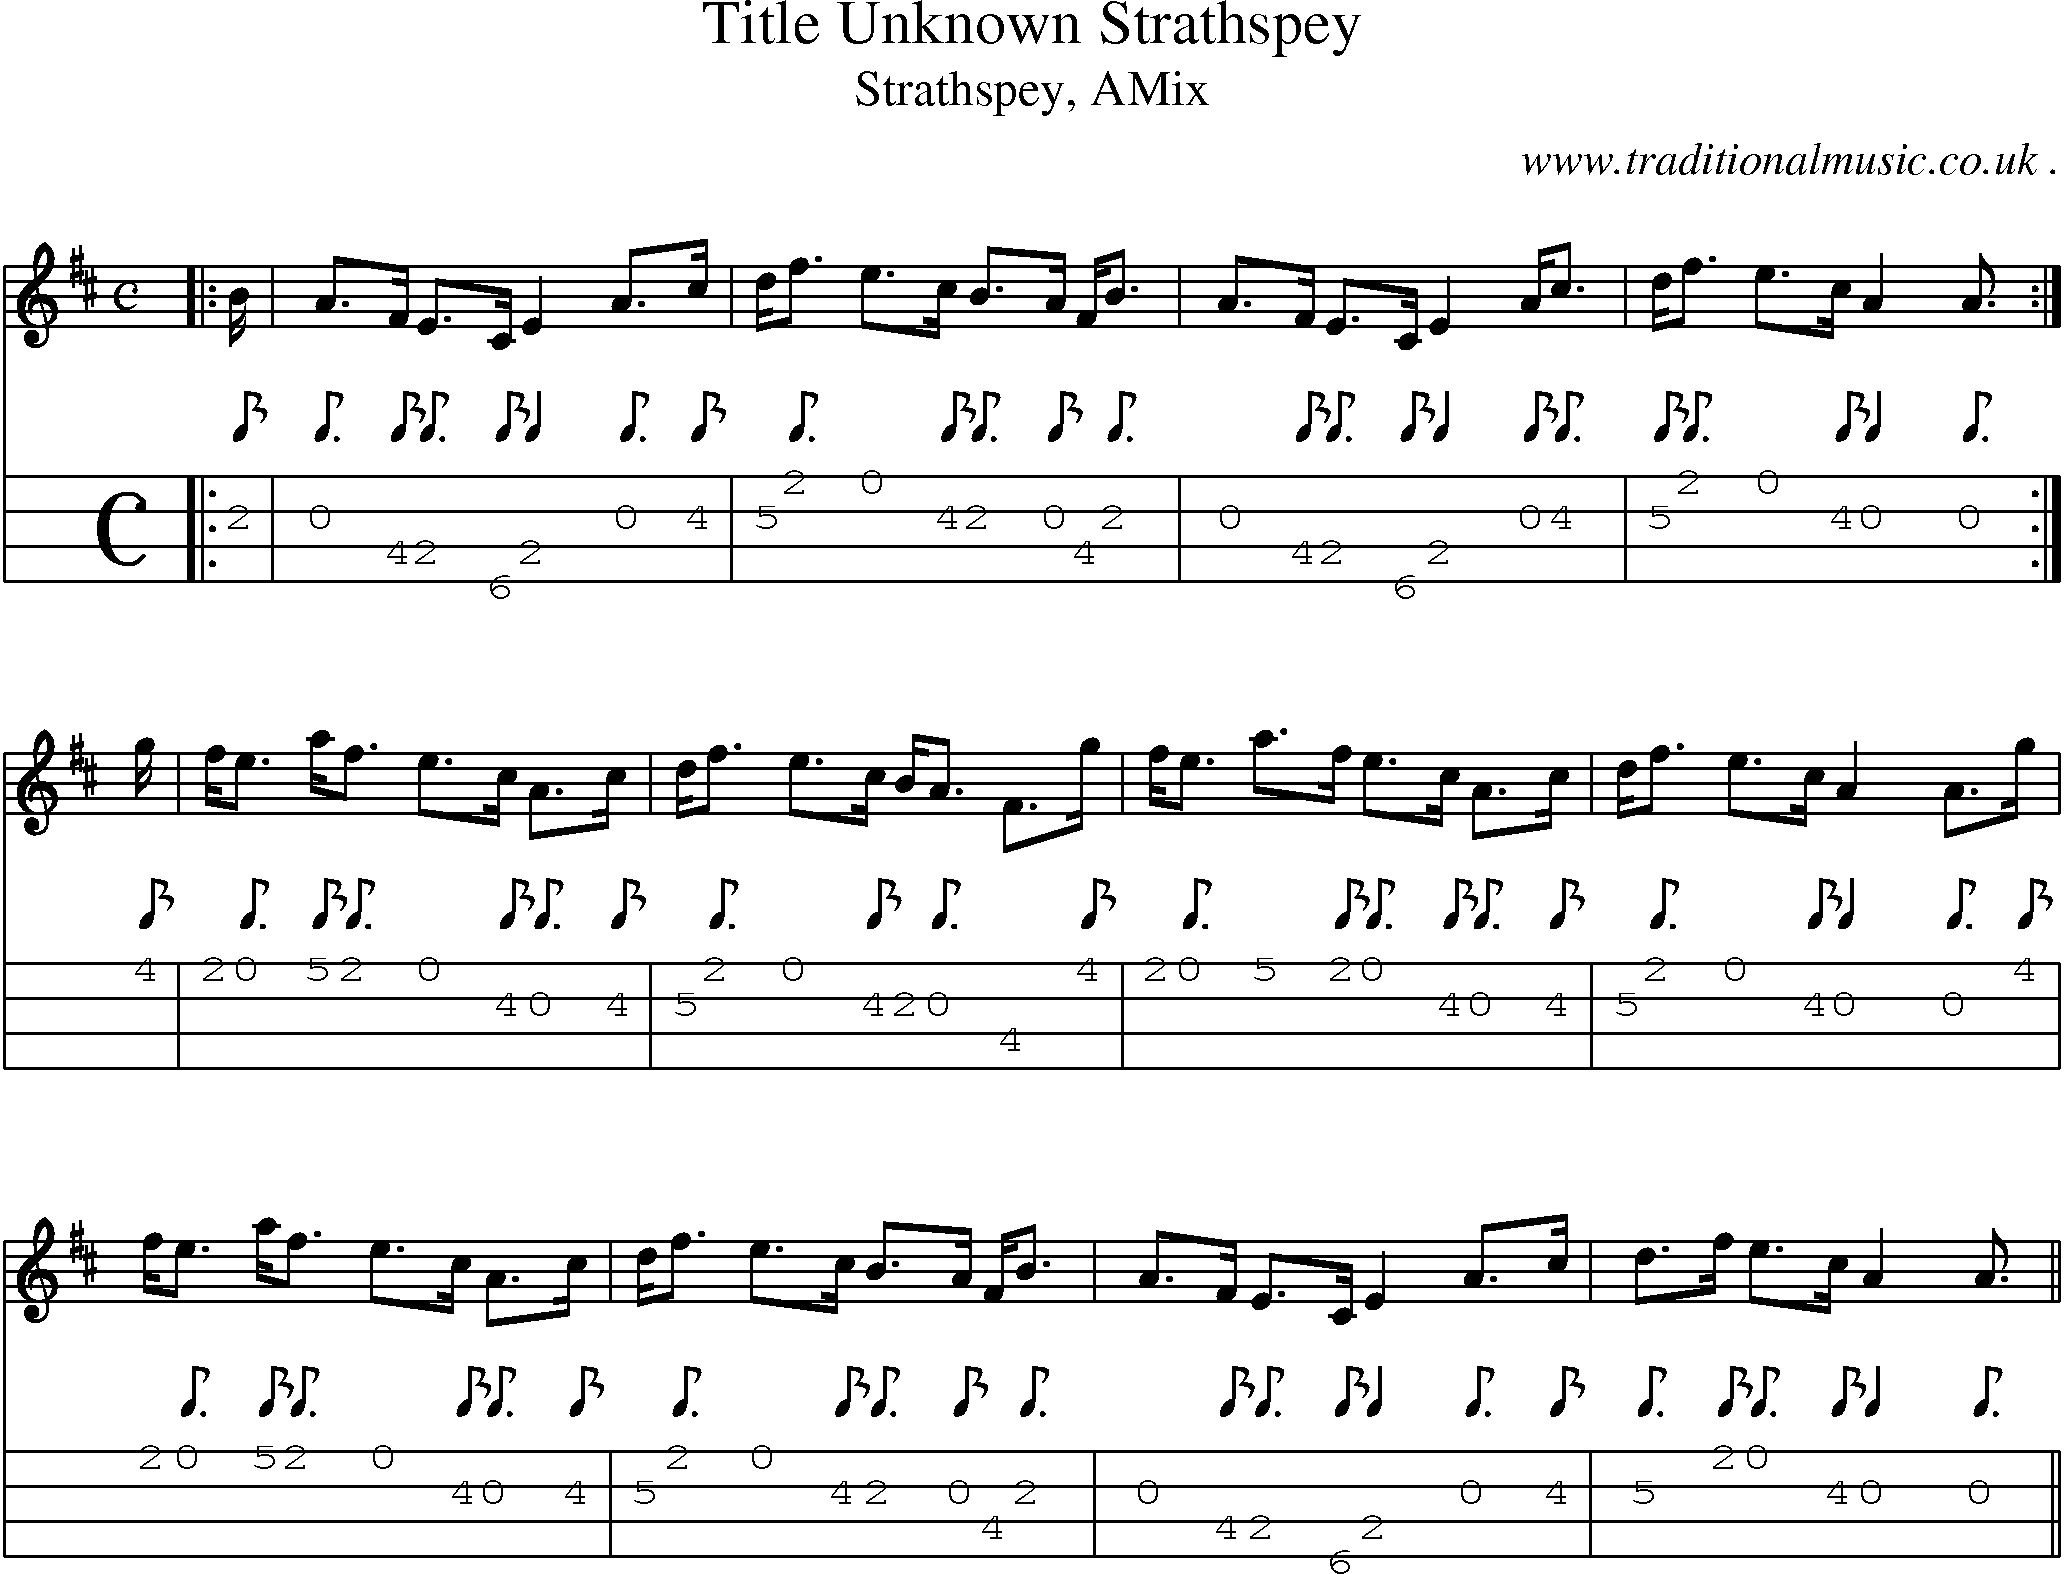 Sheet-music  score, Chords and Mandolin Tabs for Title Unknown Strathspey